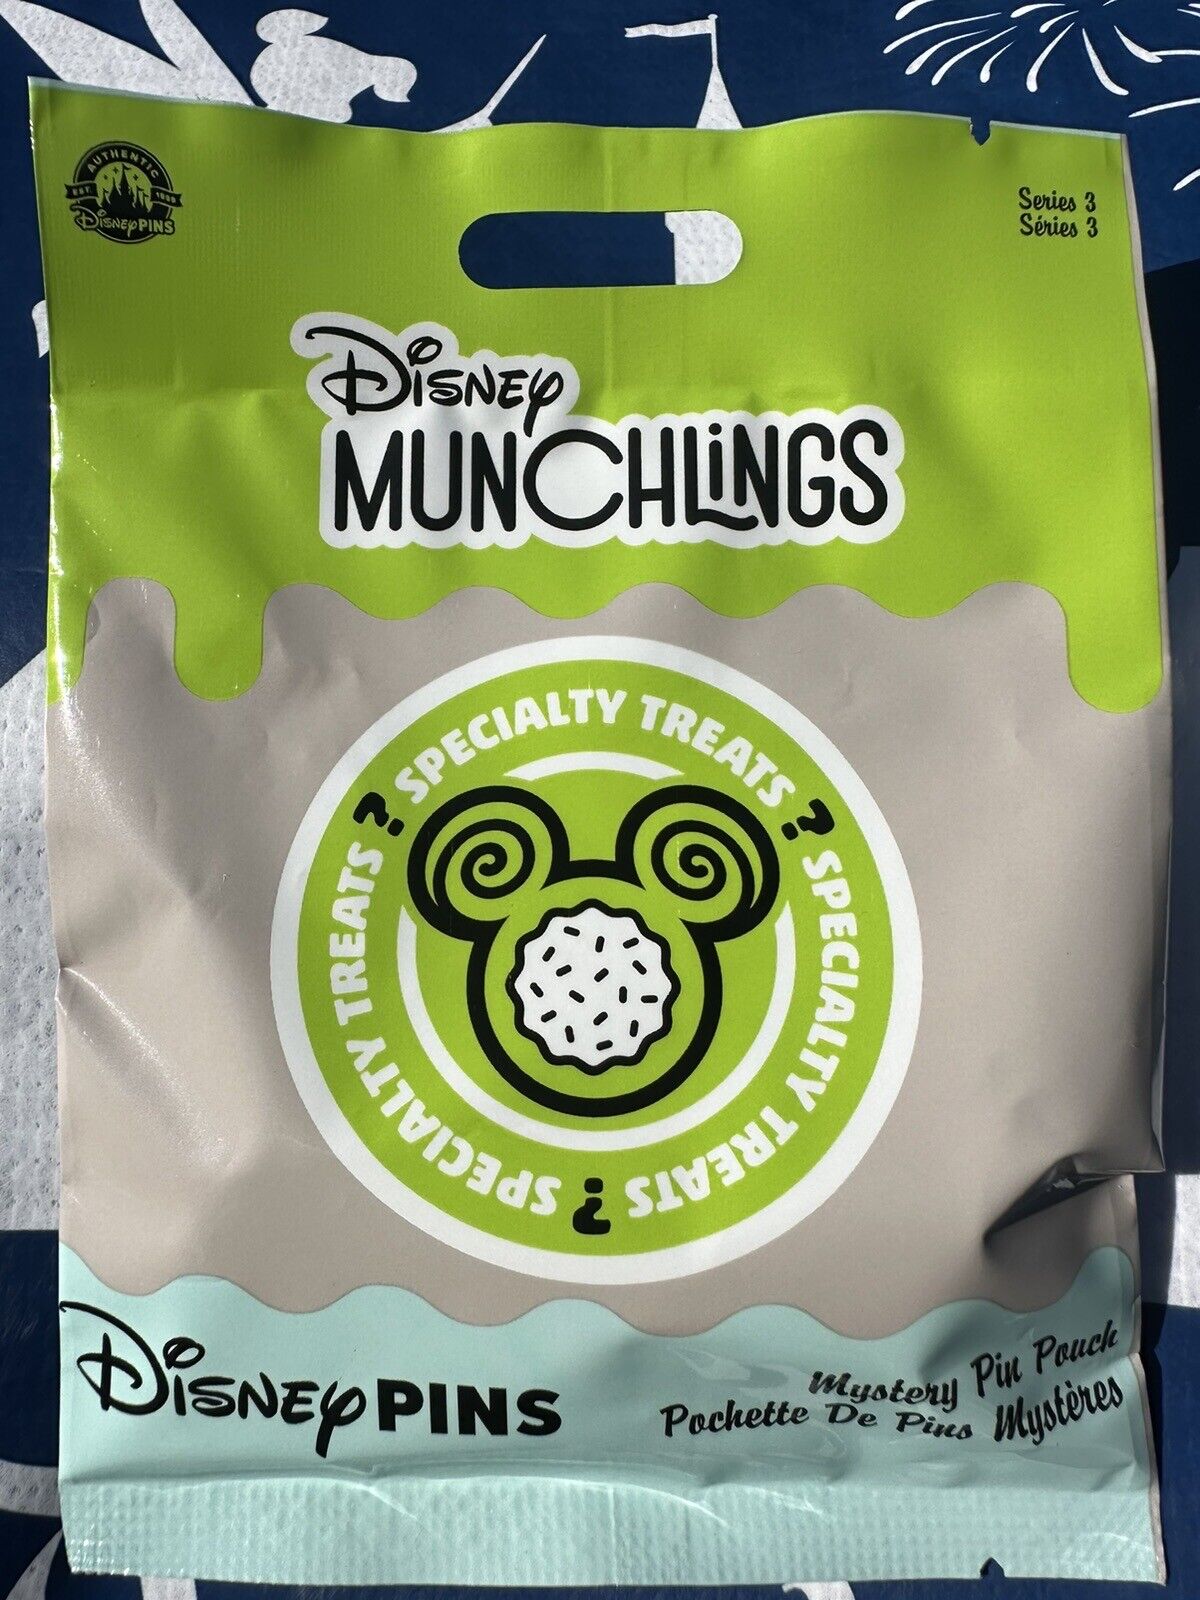 Disney Munchlings Series 3 Mystery Collectible Pin Pack Disney Pin